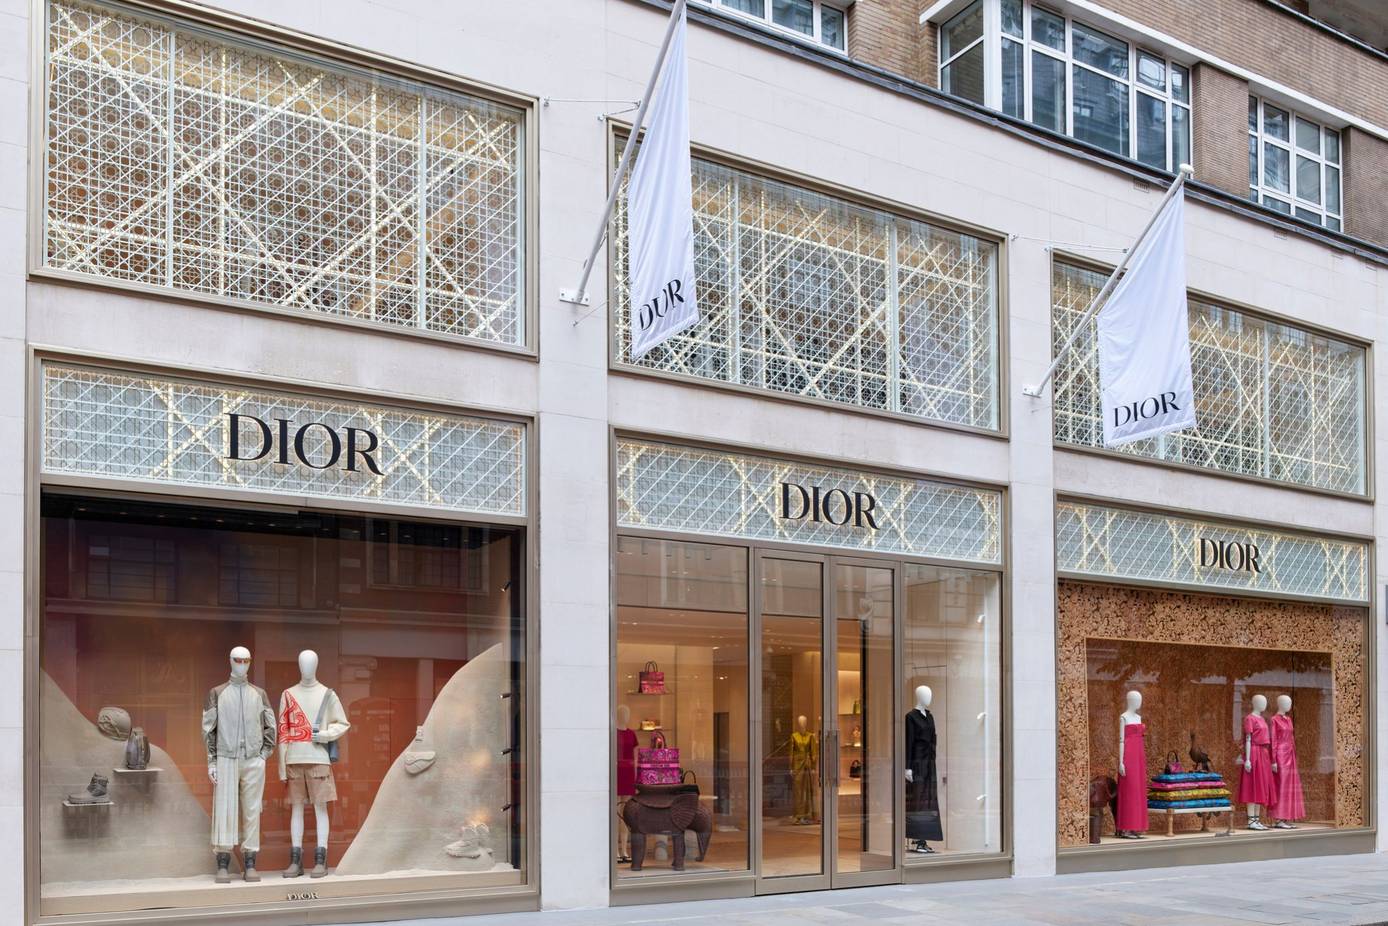 Dior opens new London boutique on Sloane Street